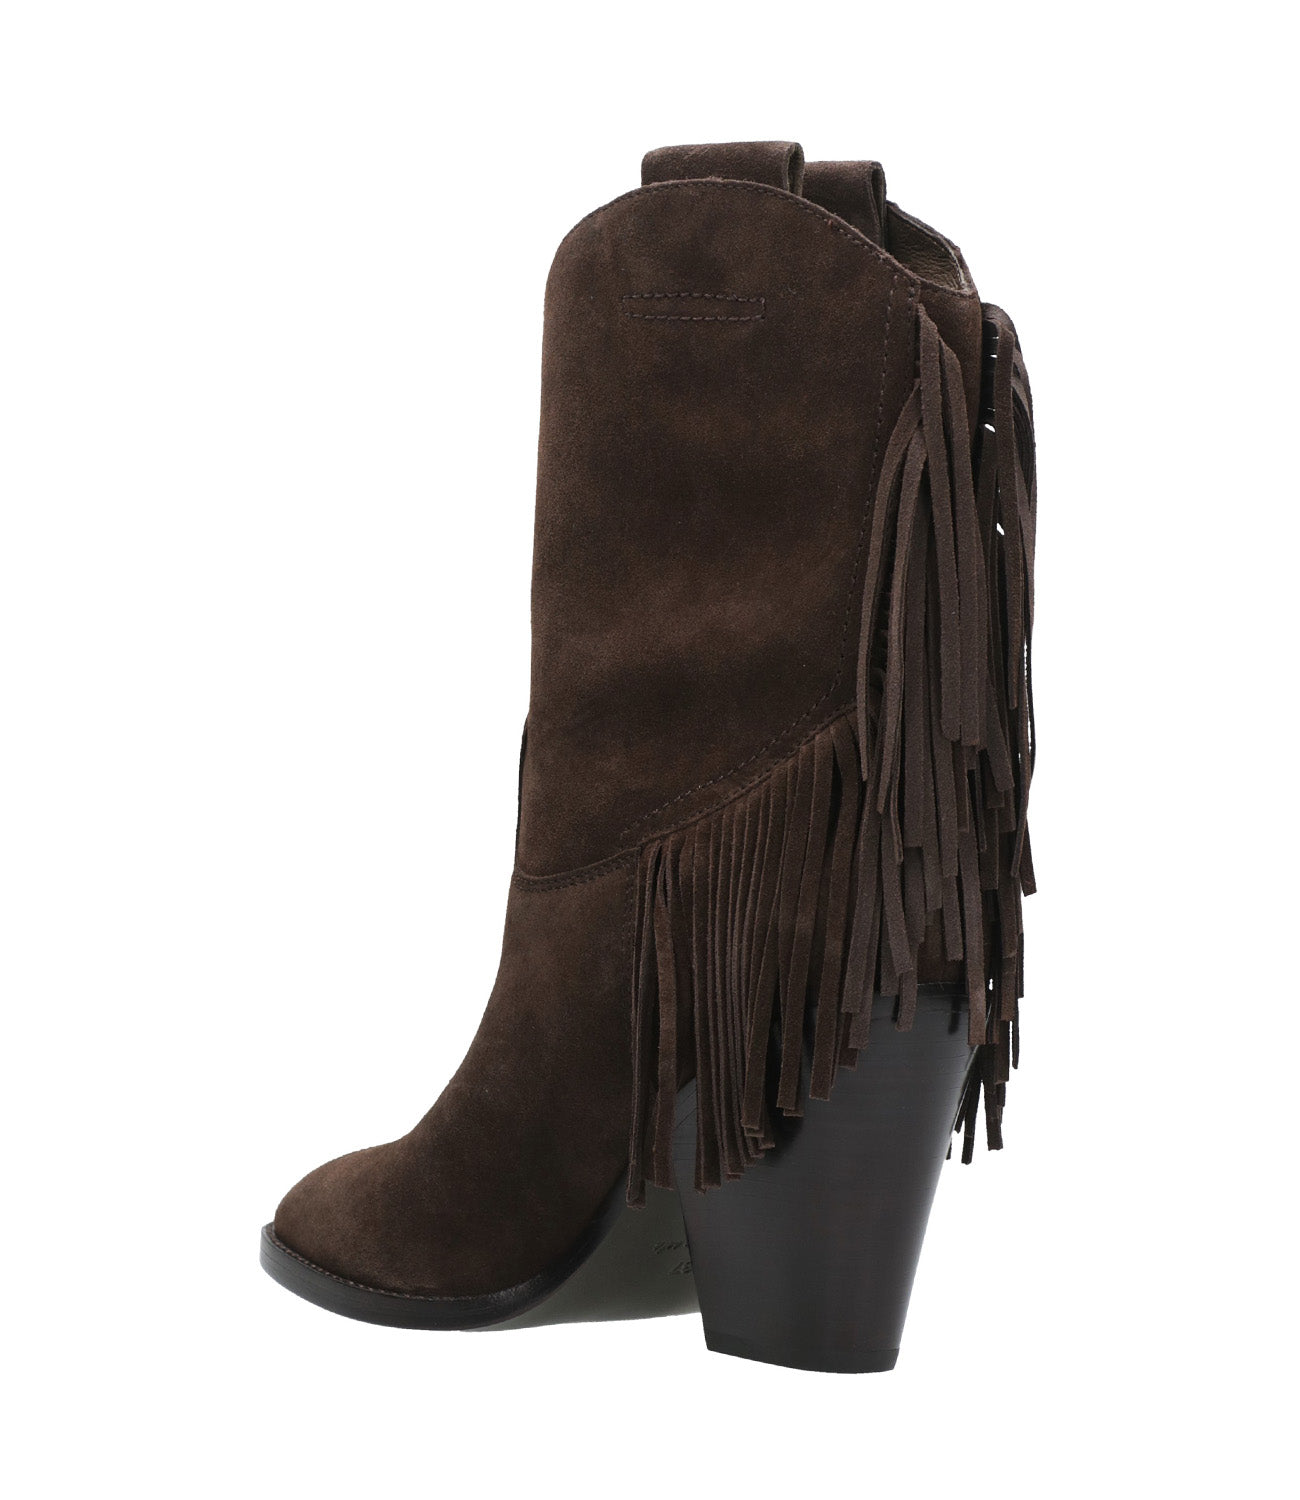 Emotion Bis ankle boot